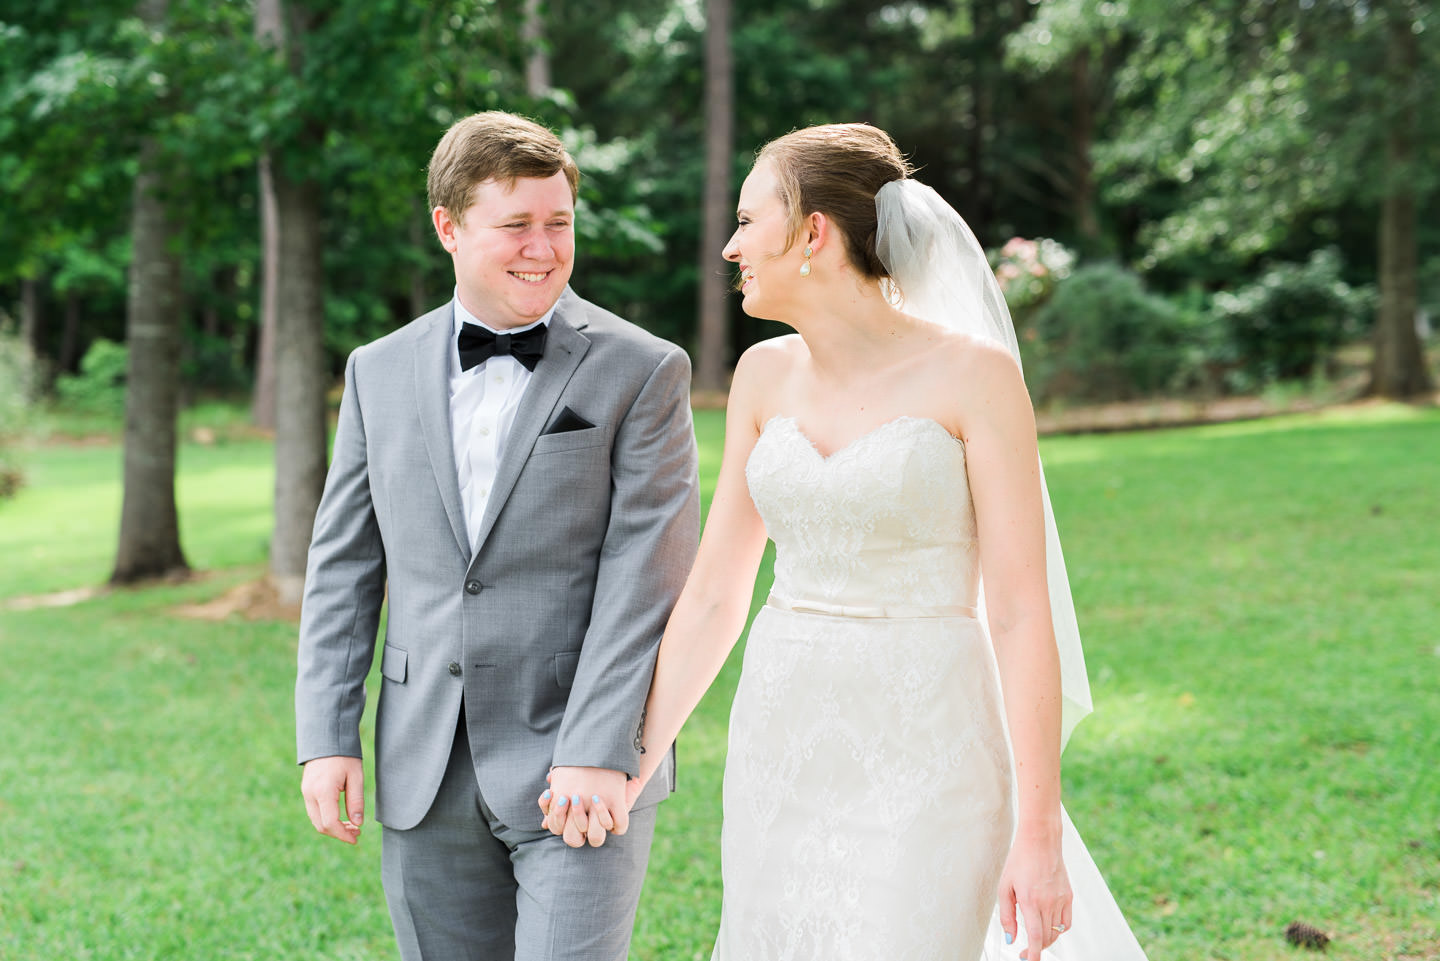 Southern bride and groom smiling at each other while walking during Mississippi outdoor wedding